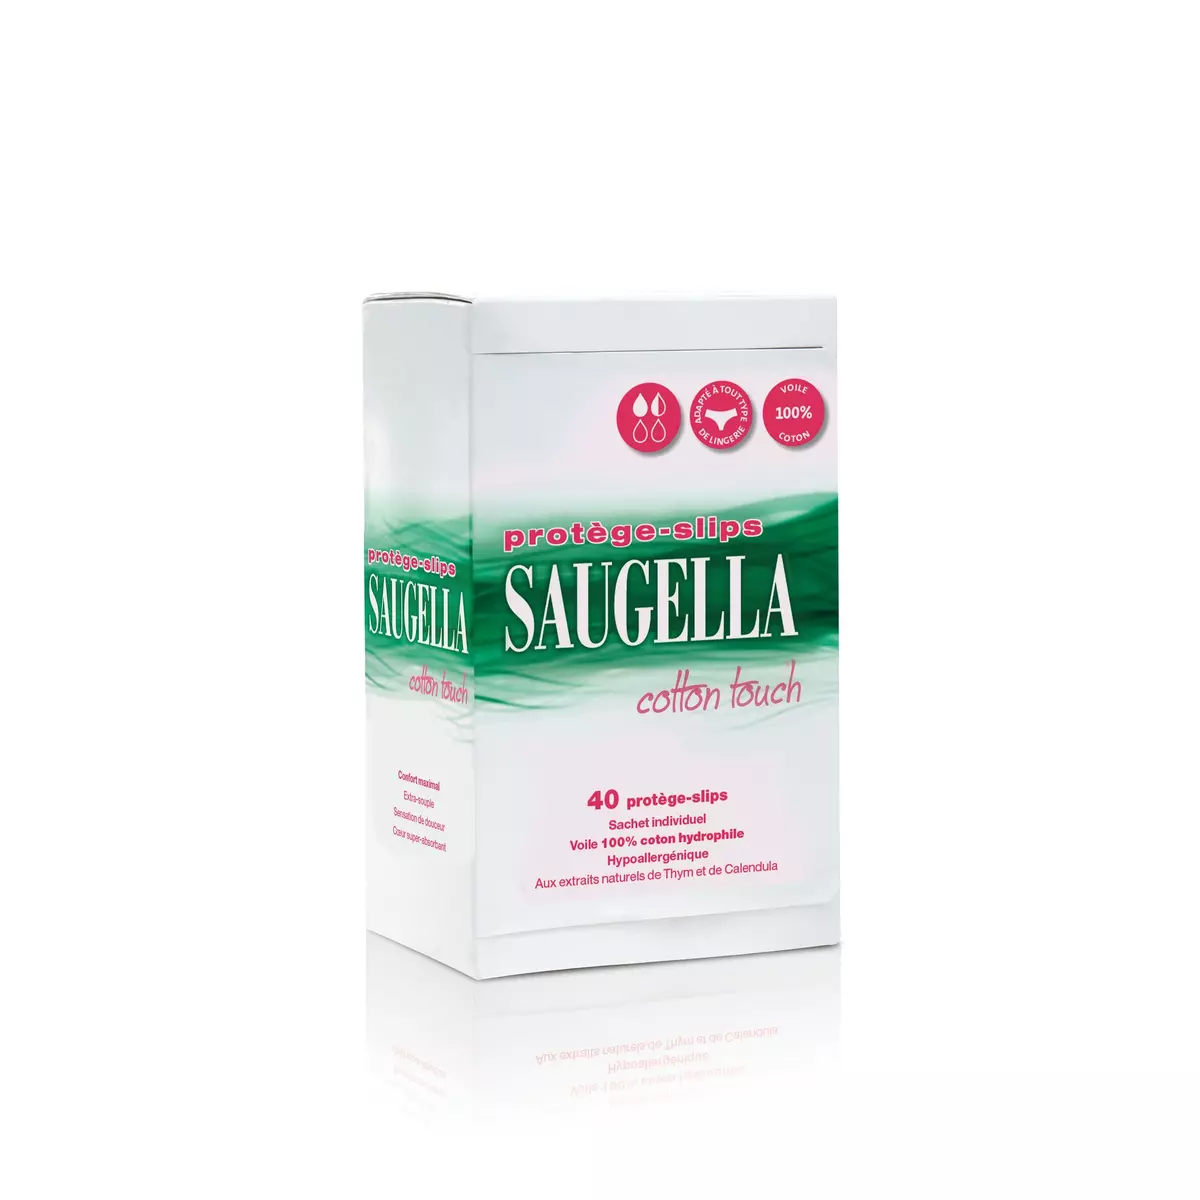 SAUGELLA Protège-slips cotton touch 40 protections